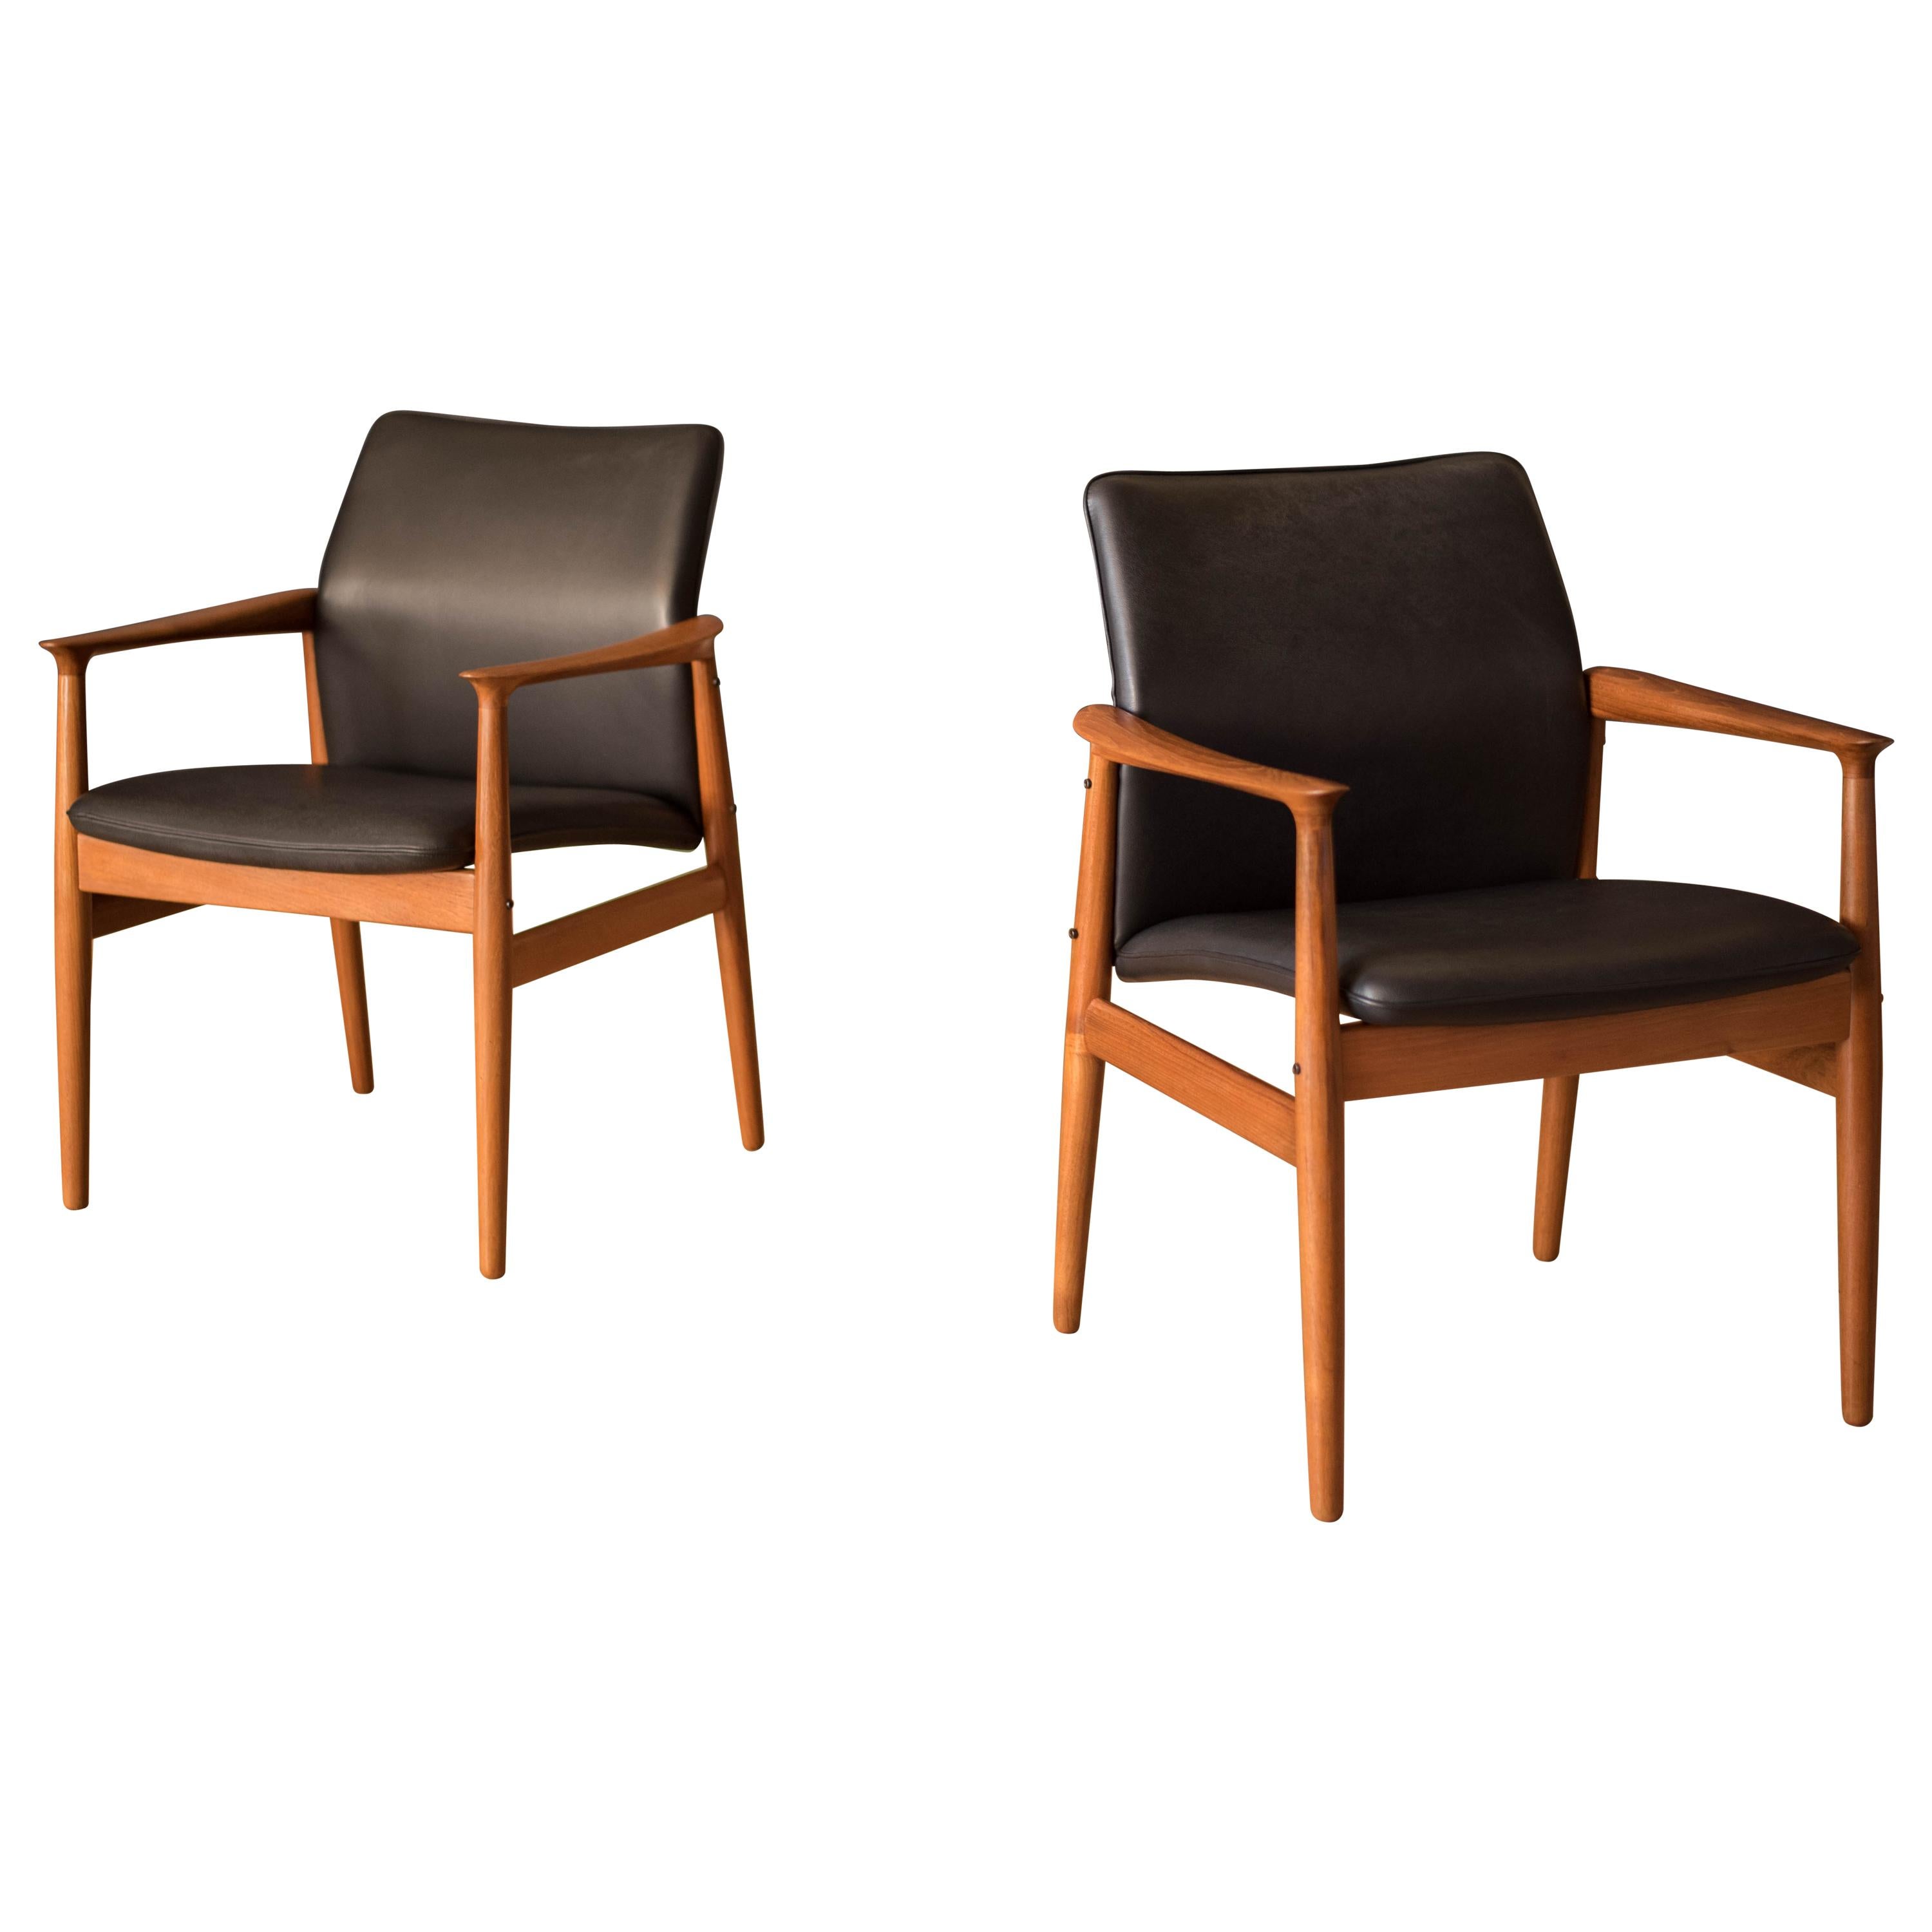 Pair of Vintage Danish Teak and Leather Armchairs by Grete Jalk for Glostrup